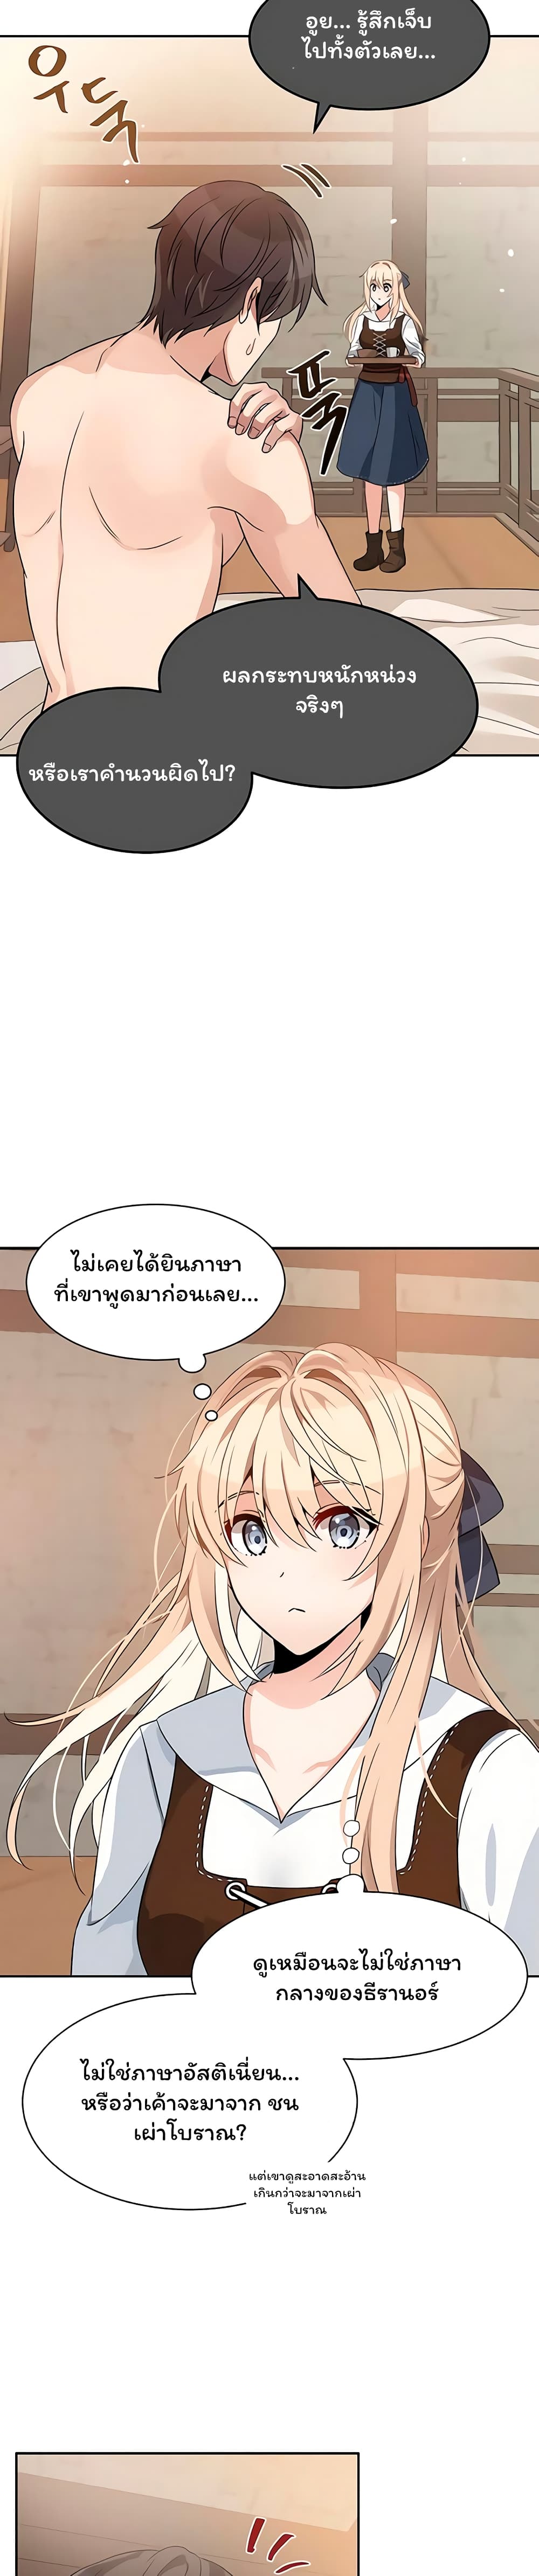 Re entering Another World ตอนที่ 2 (19)